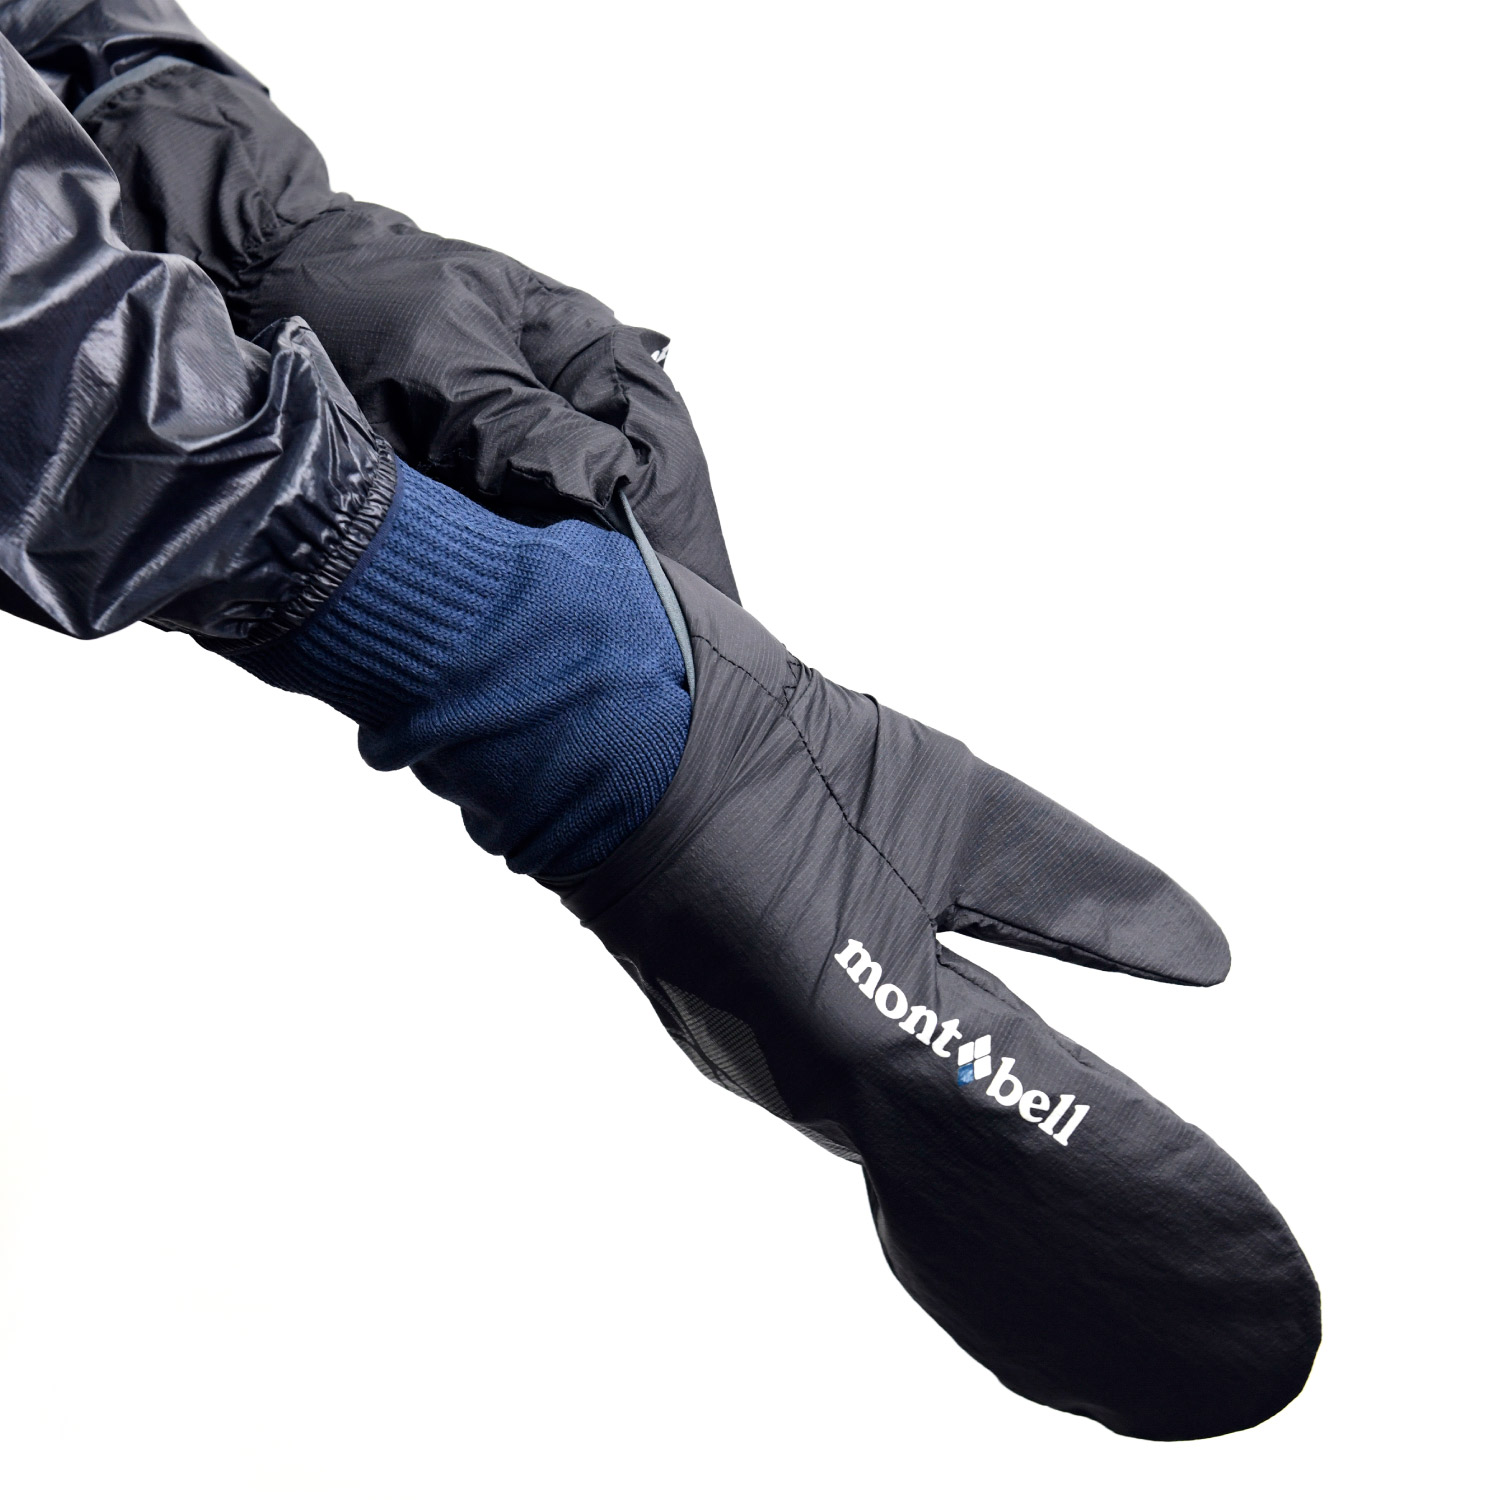 Wintergreen Shell Overmitts (Unisex)-Made in Ely, MN.